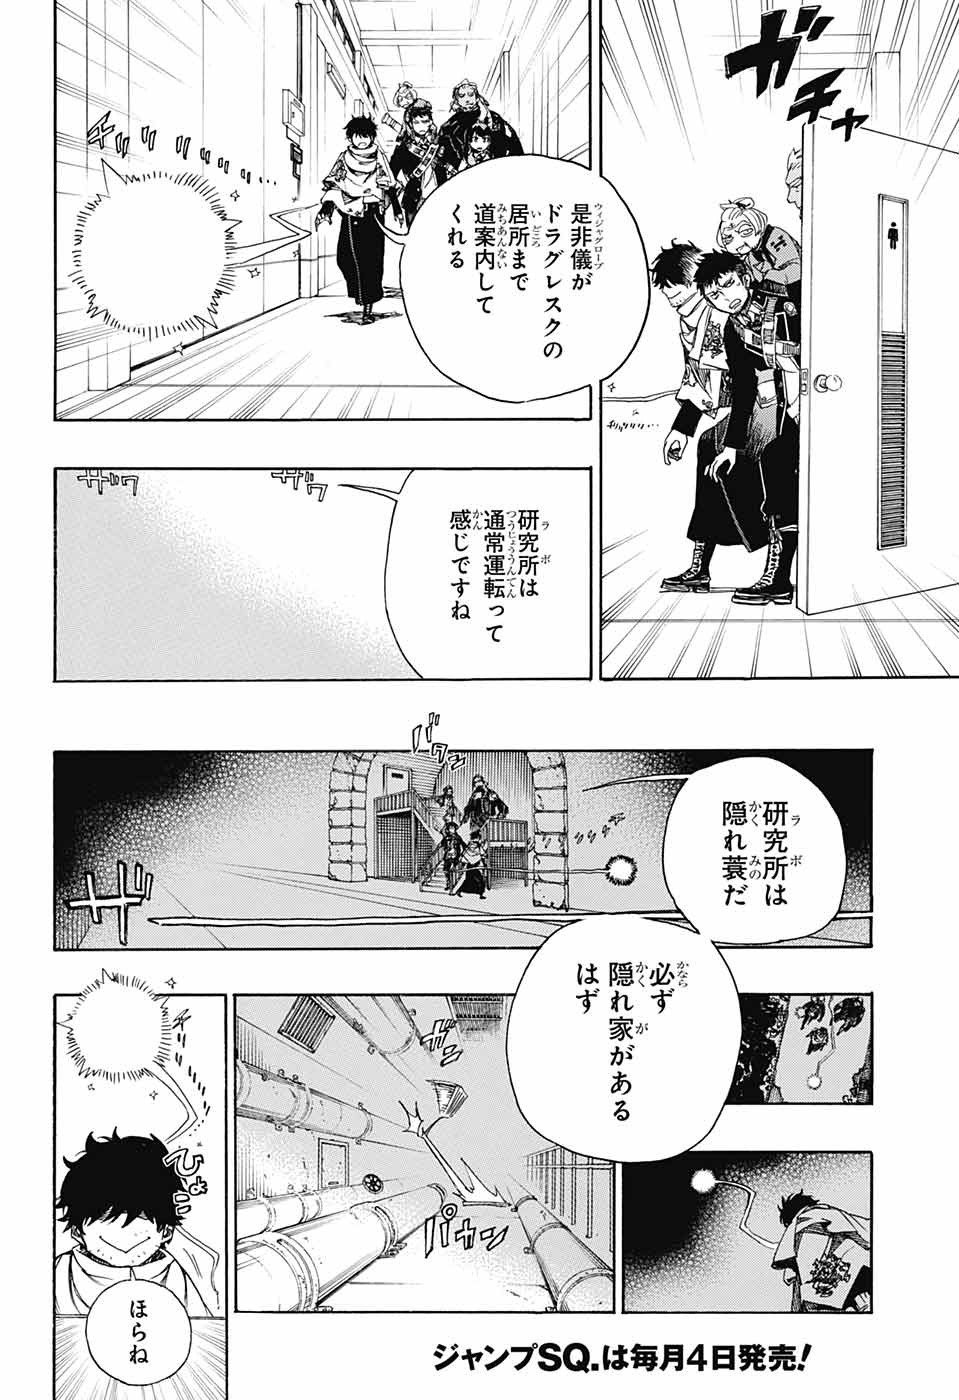 Ao no Exorcist - Chapter 112 - Page 4